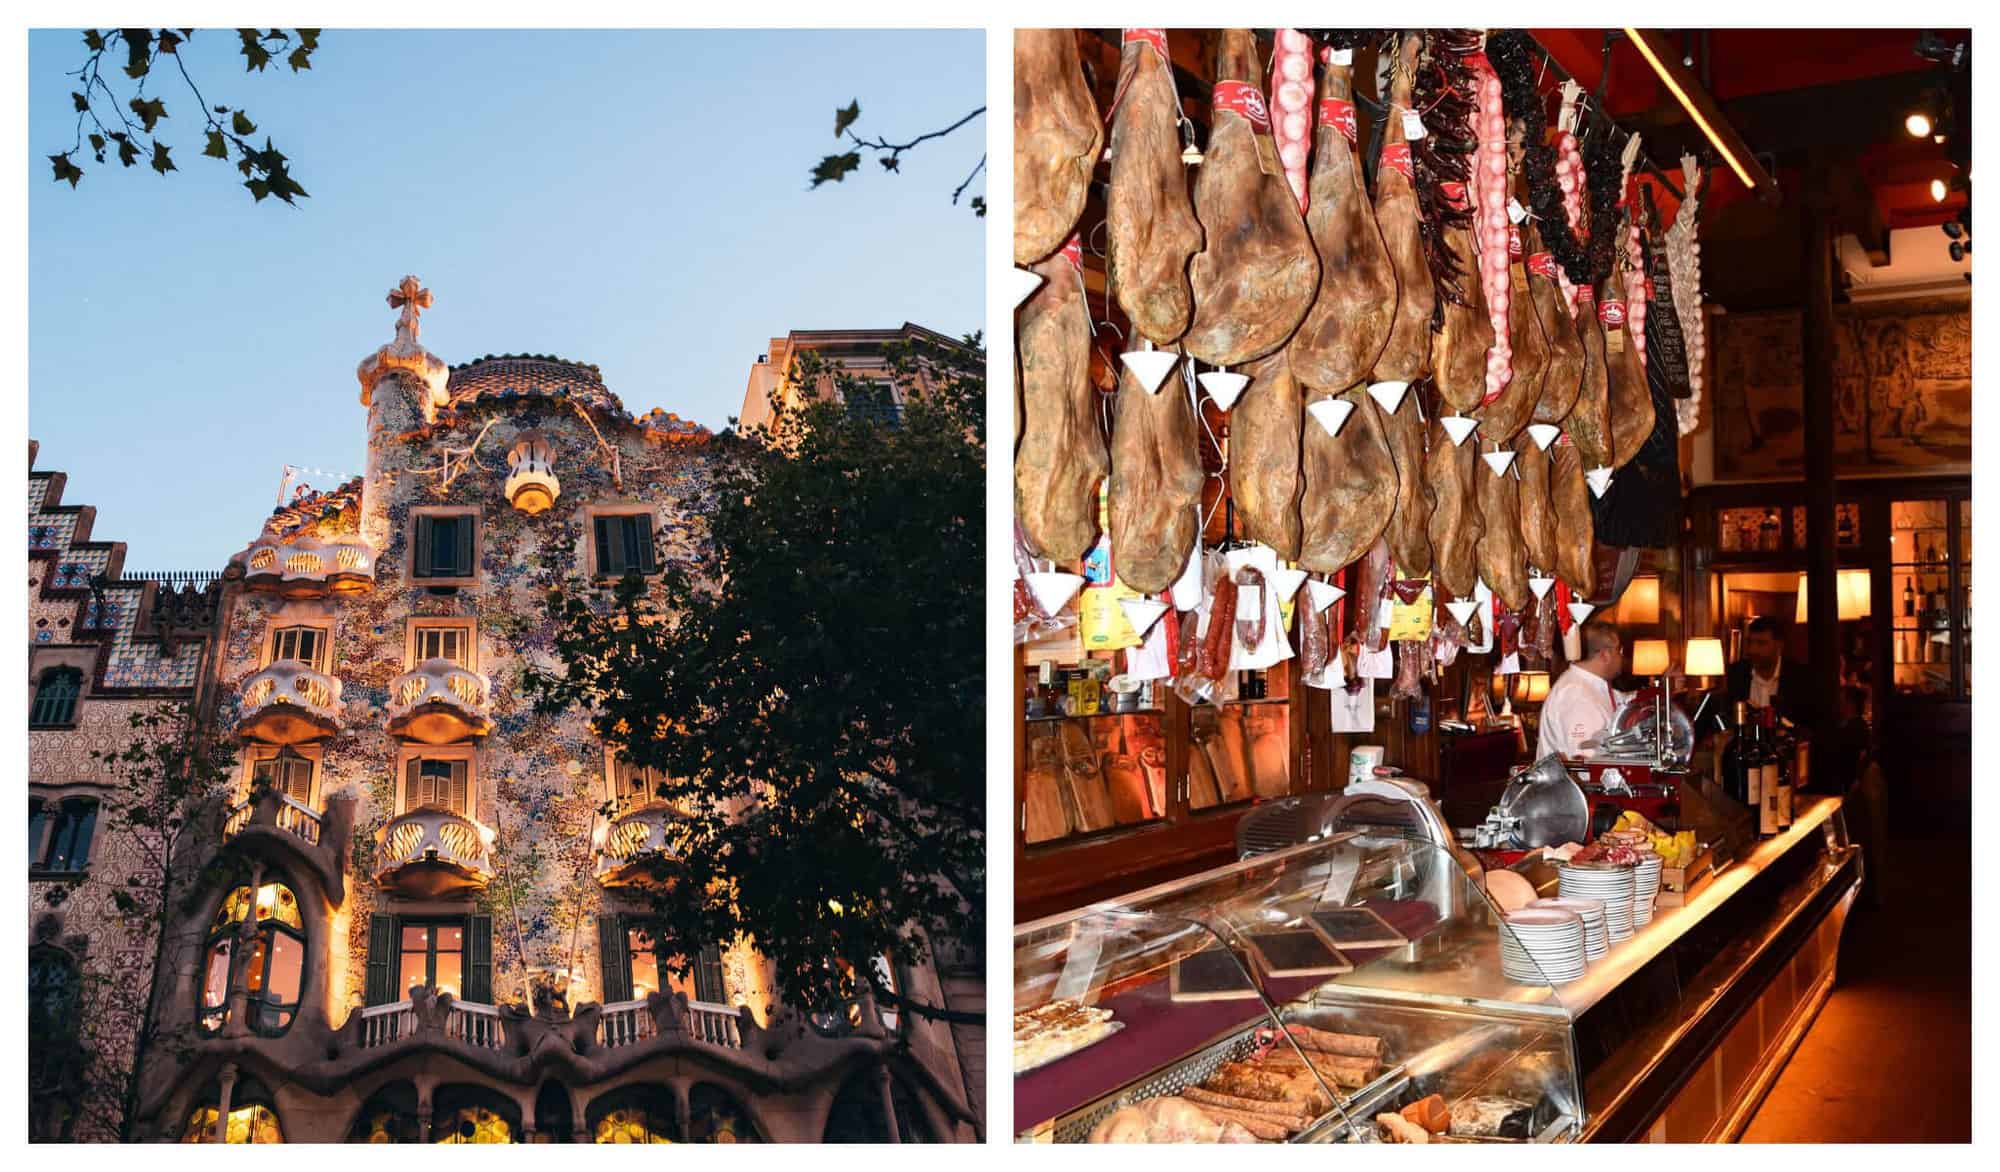 Left: Gaudi's Casa Battlo lit up with yellow lights at dusk. Right: A restaurant entrance filled with smoked ham and cheese.